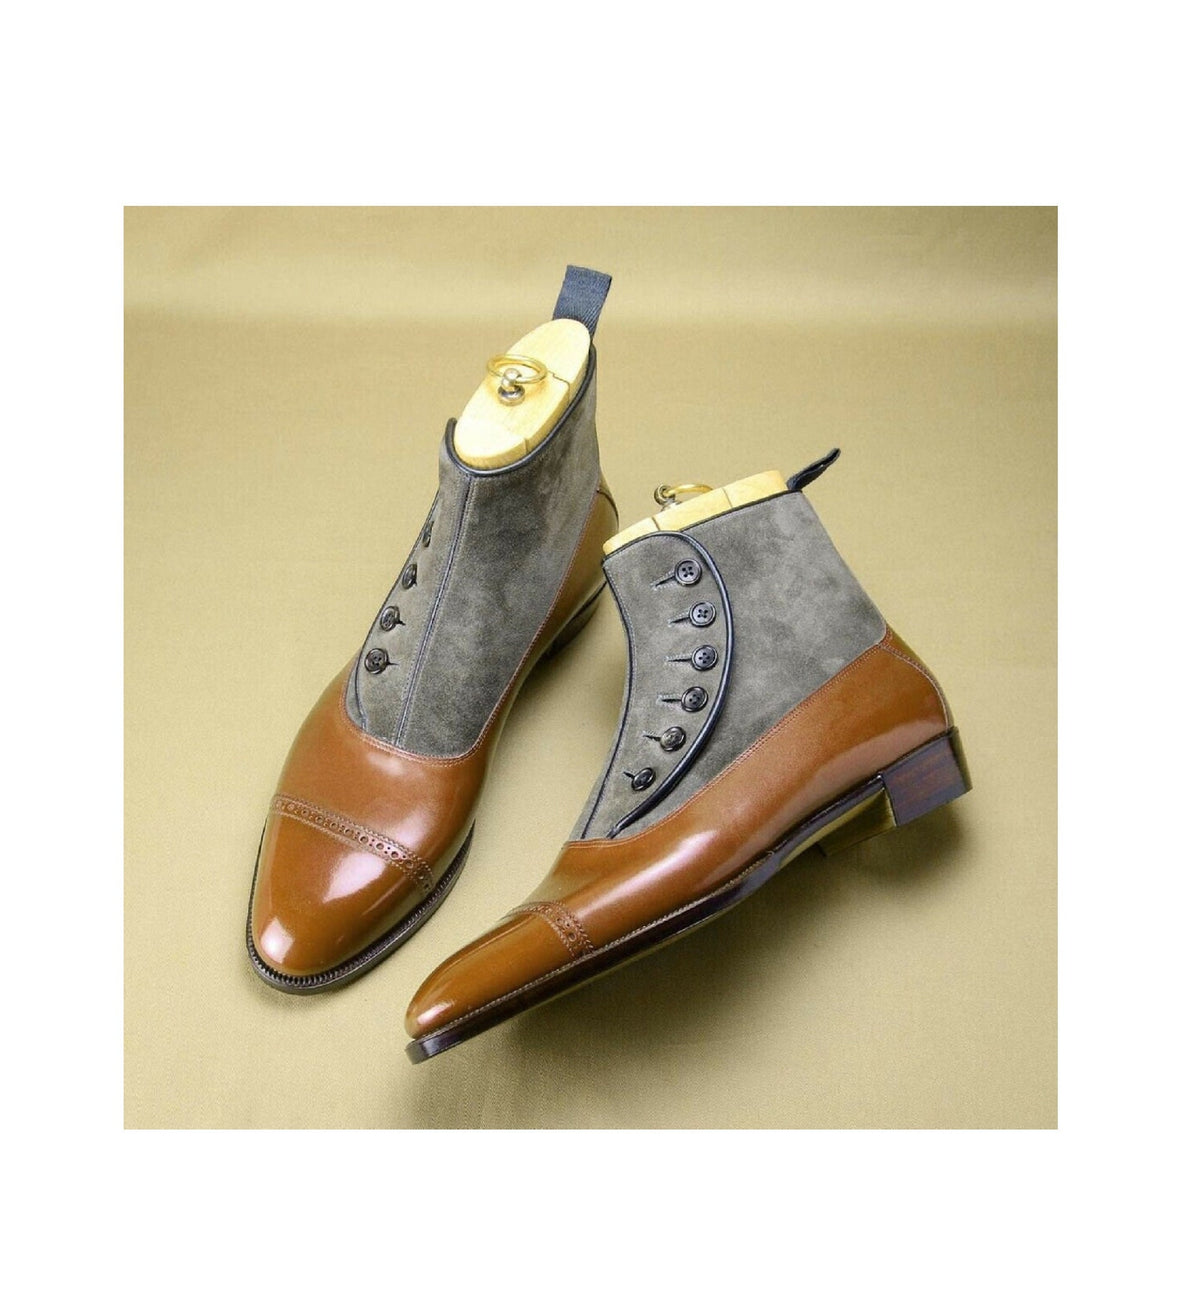 New Pure Handmade Leather And Suede Button Top Boot For Men, Men's Bespoke Tan & Grey Cap Toe Ankle Boots, Leather Boot